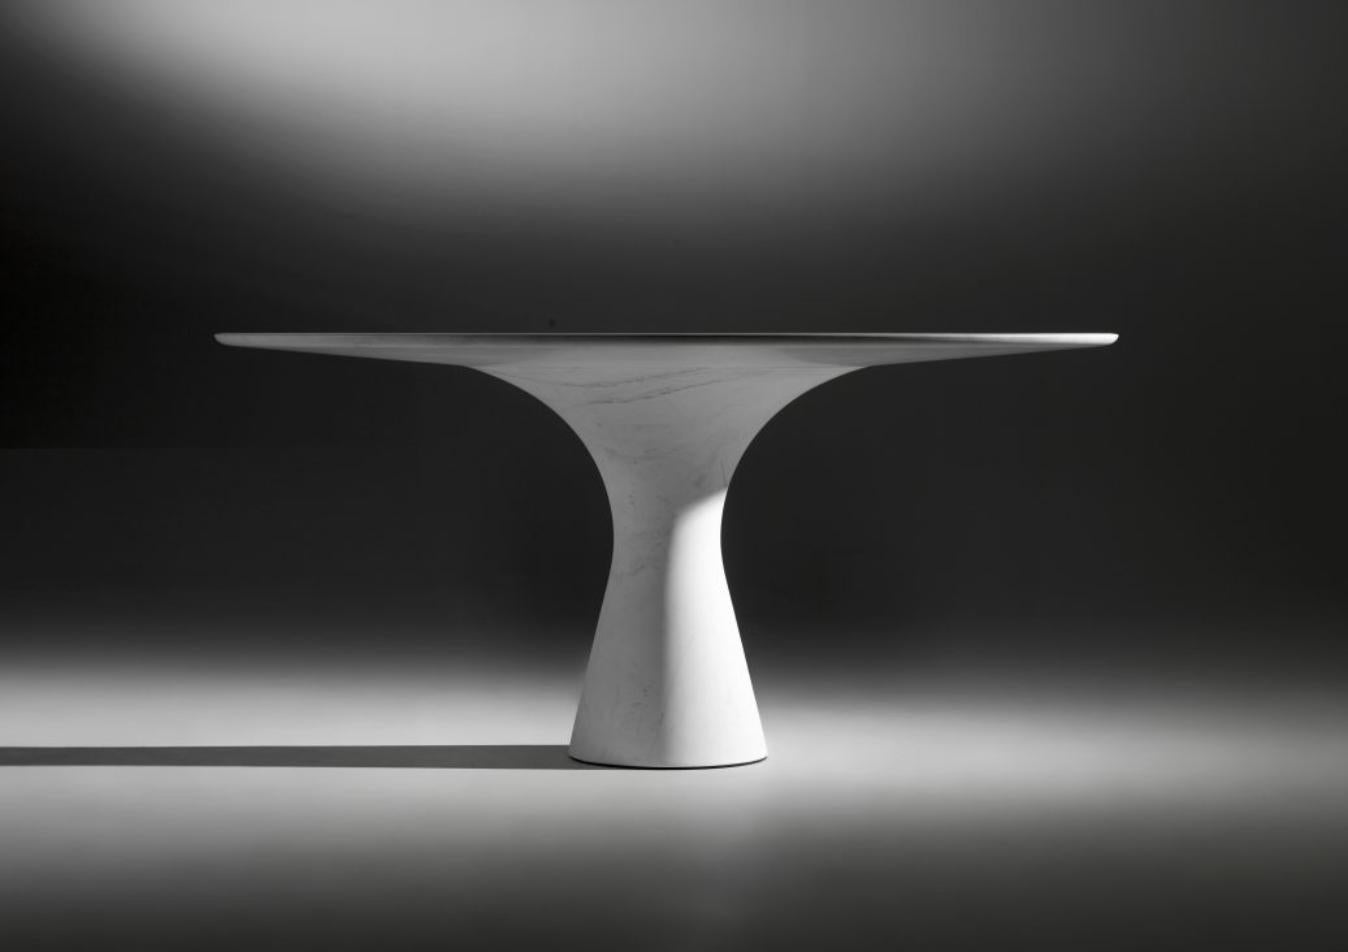 Grey Saint Laurent Refined Contemporary Marble Oval Table 210/75 For Sale 4